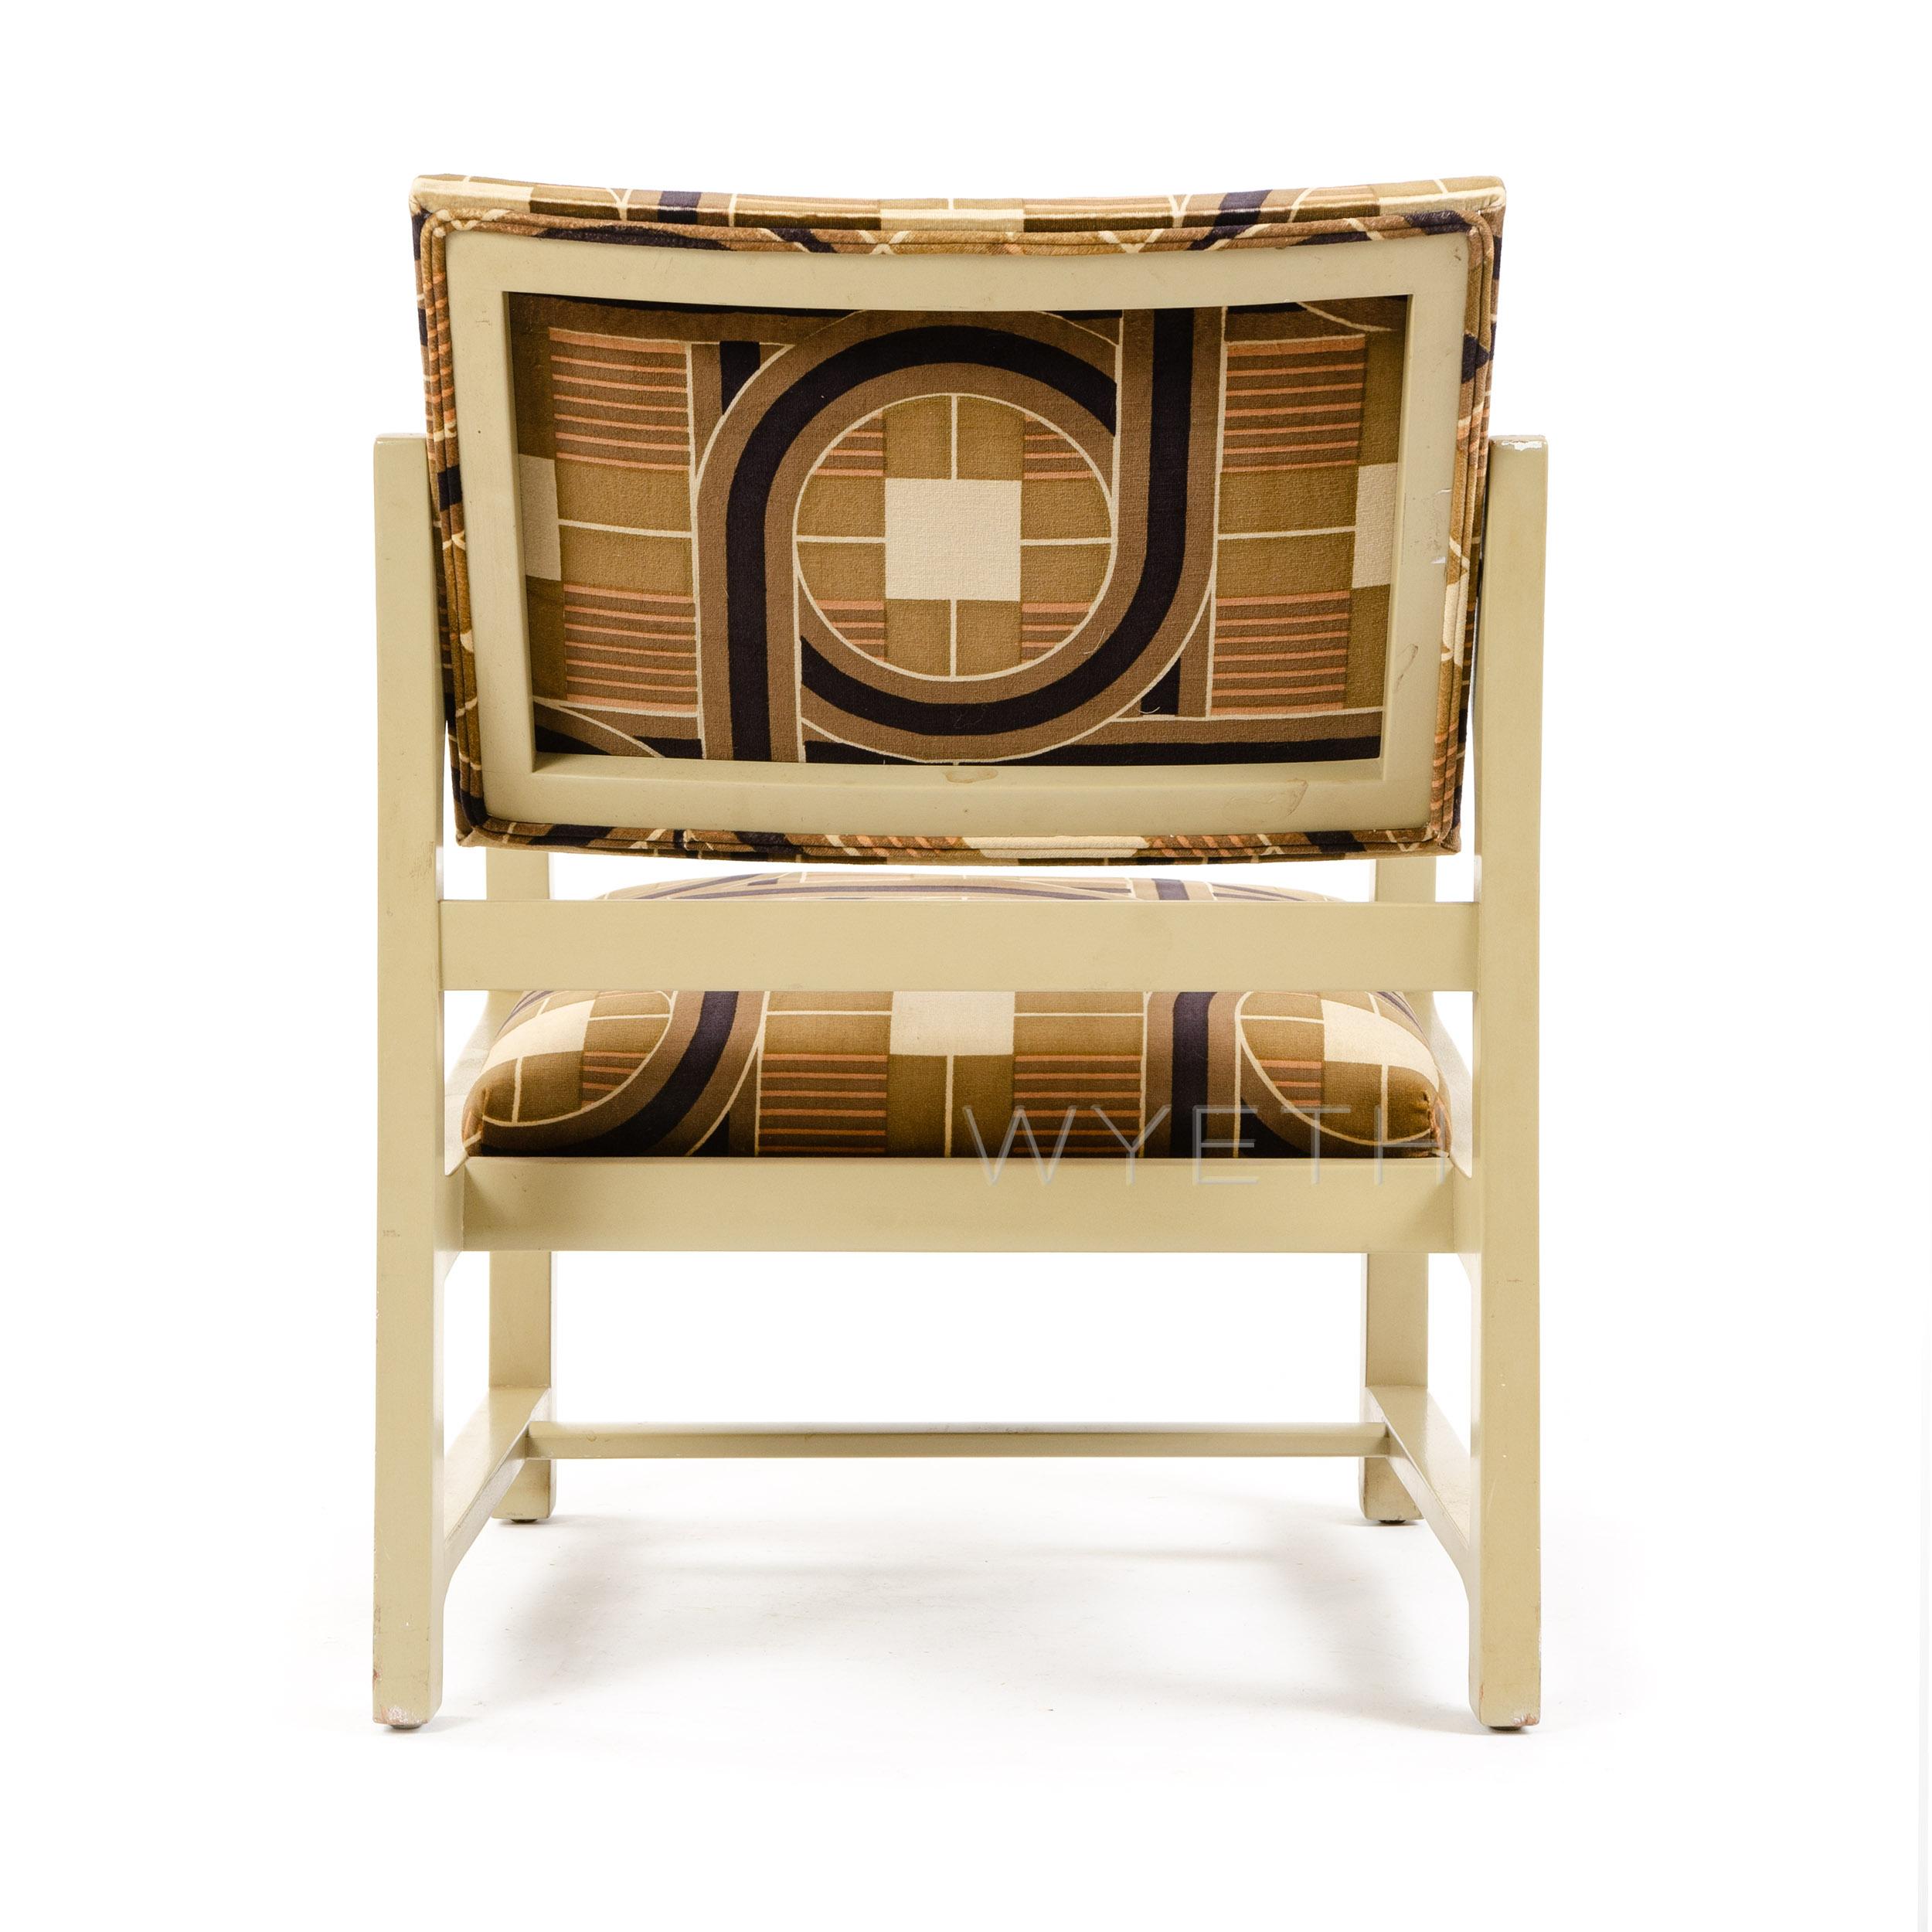 Lacquered Mahogany Lounge Chair by Edward Wormley for Dunbar In Good Condition For Sale In Sagaponack, NY